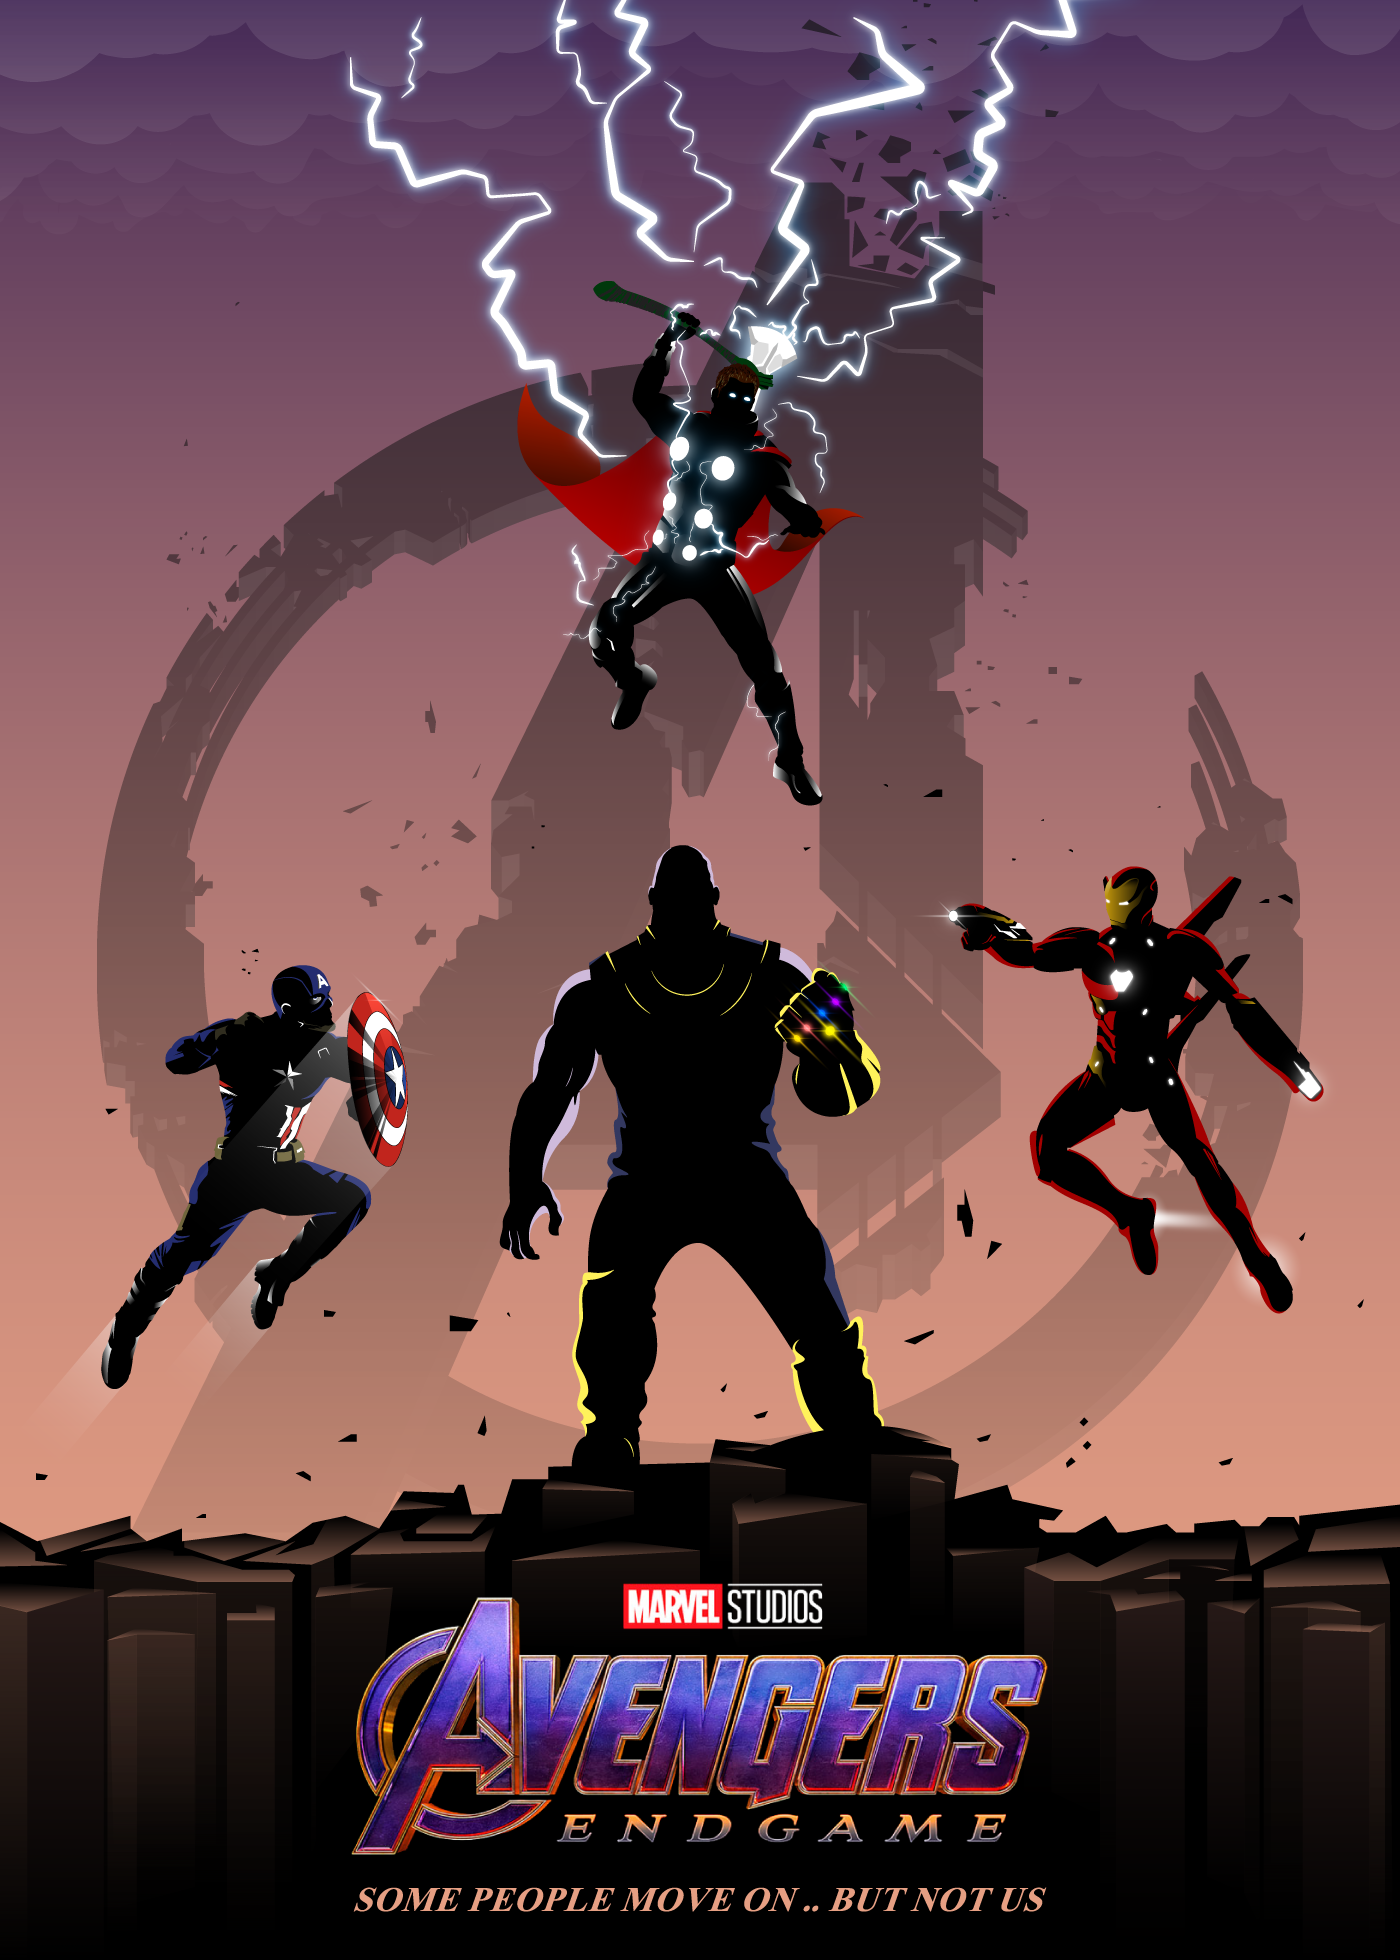 SOME PEOPLE MOVE ON .. BUT NOT US) AVENGERS POSTER on Behance